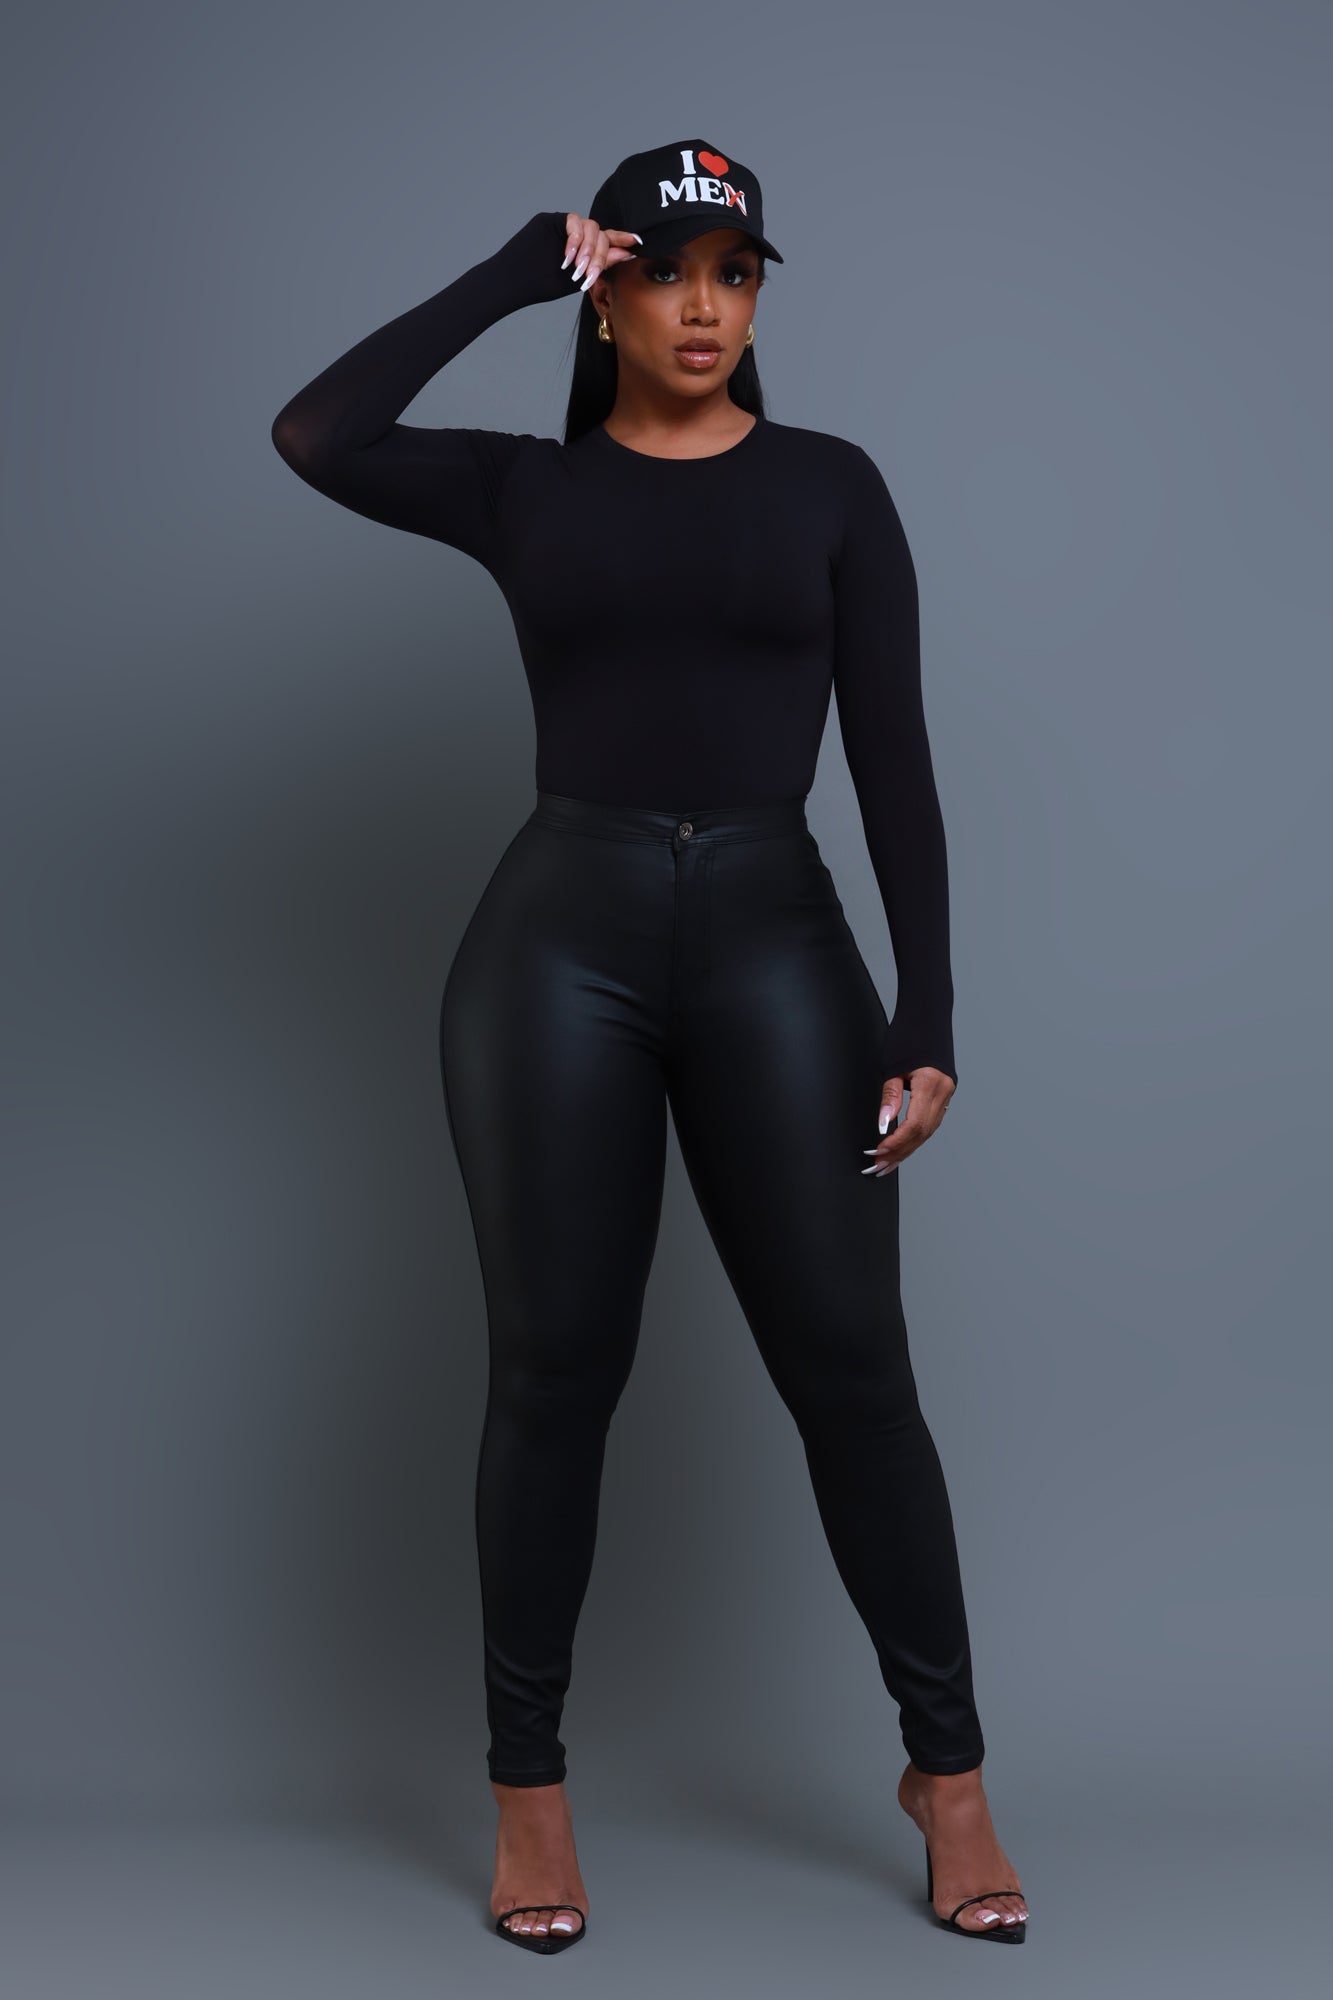 What are faux leather leggings? - Quora